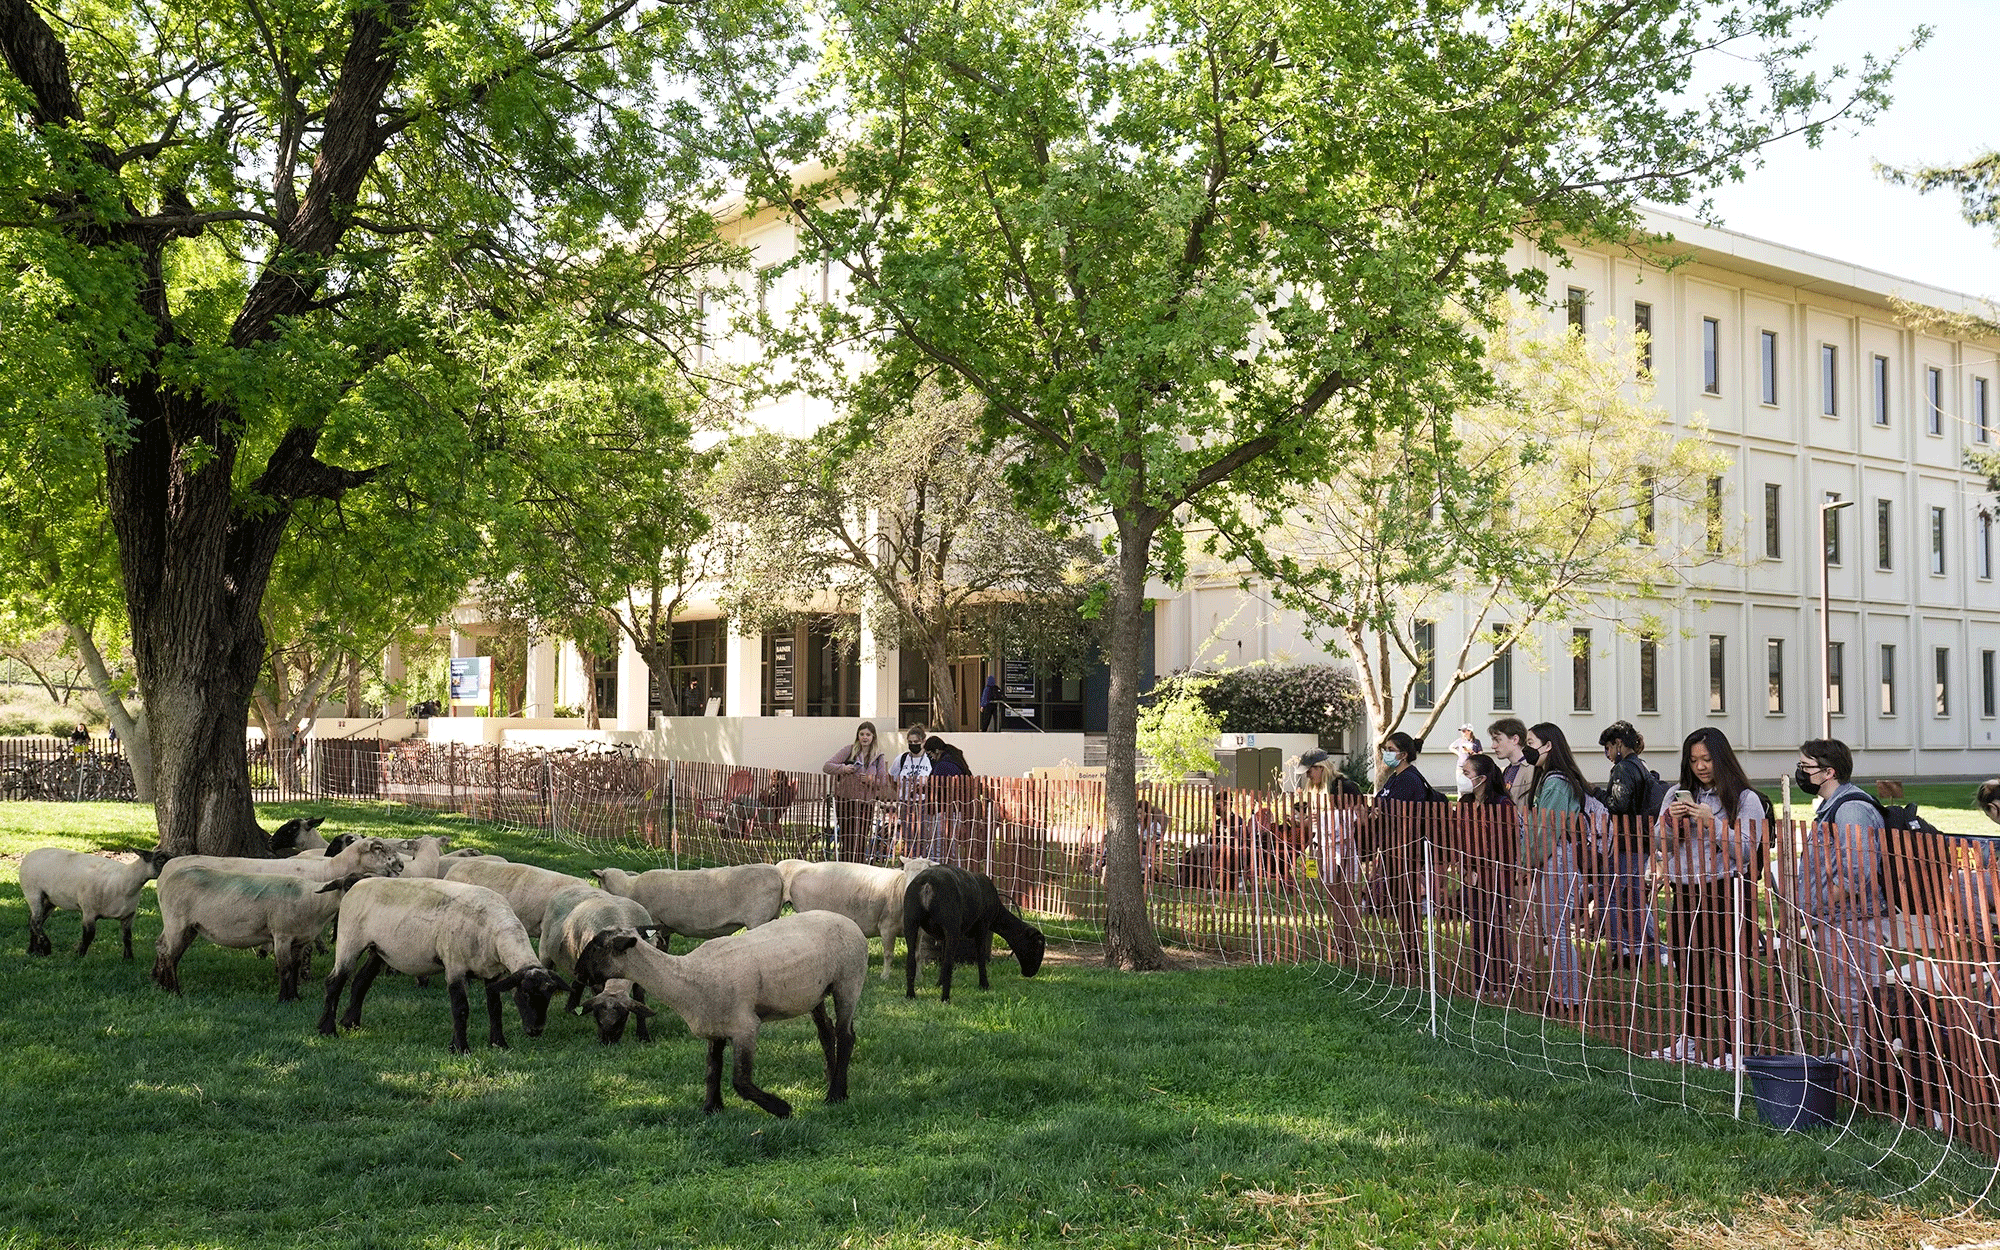 Sheep grazing near the Silo last April attracted many onlookers. (Gregory Urquiaga/UC Davis)